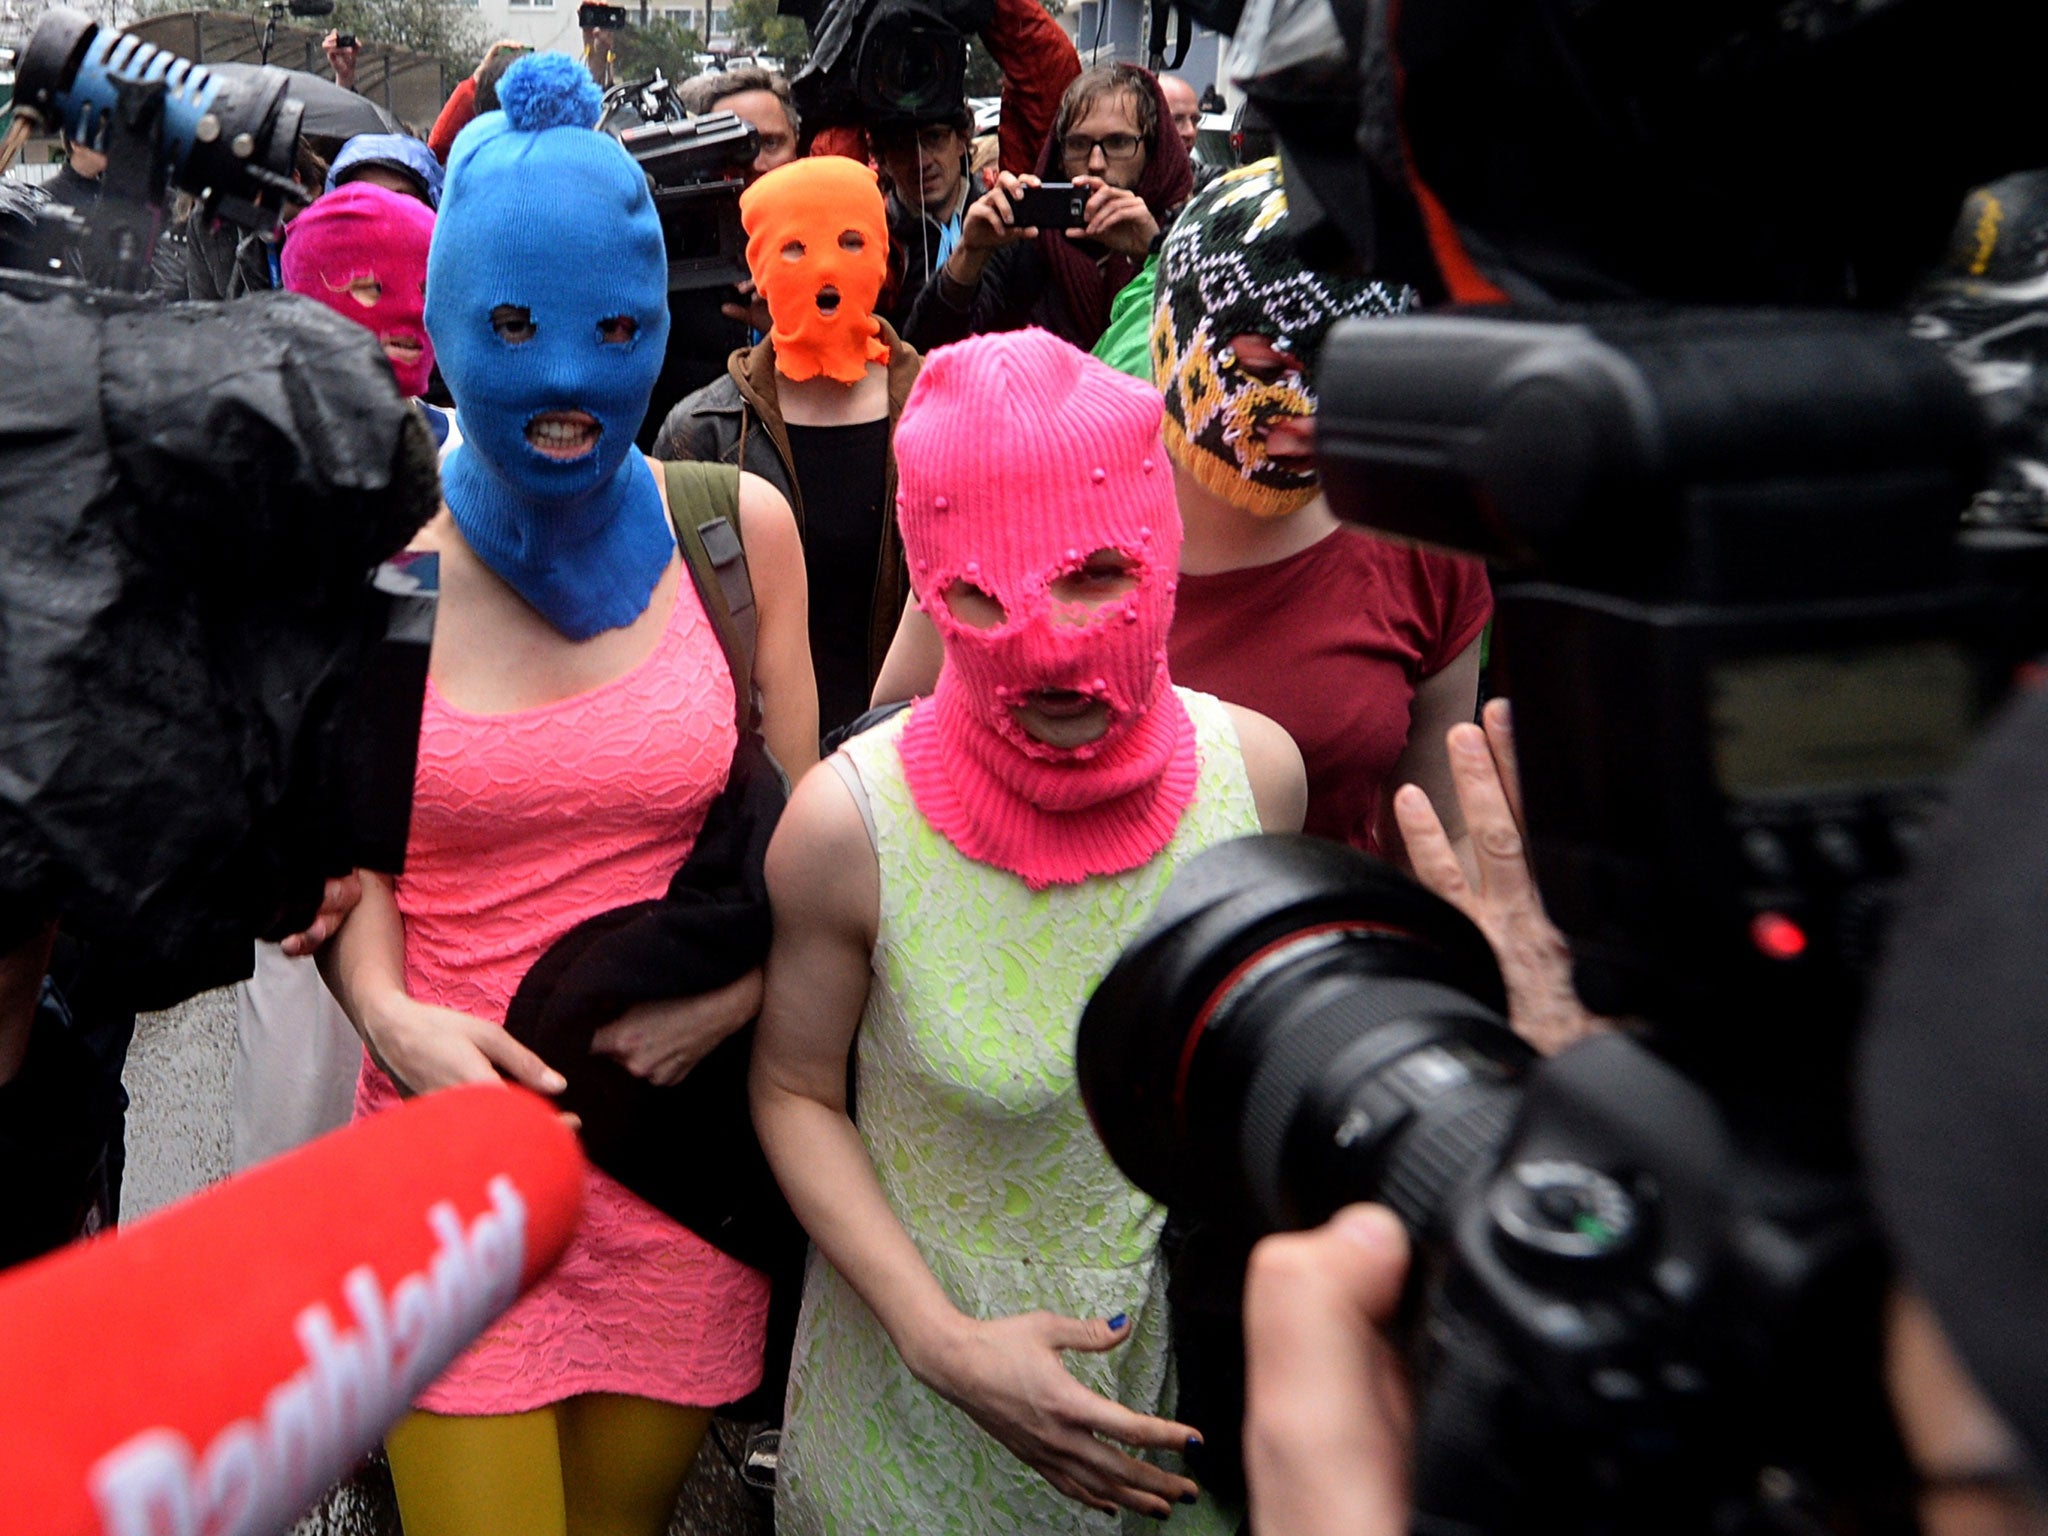 Pussy Riot came to prominence in 2012 when its members were imprisoned for staging a protest against the Russian president, Vladimir Putin, in a Russian Orthodox cathedral in Moscow